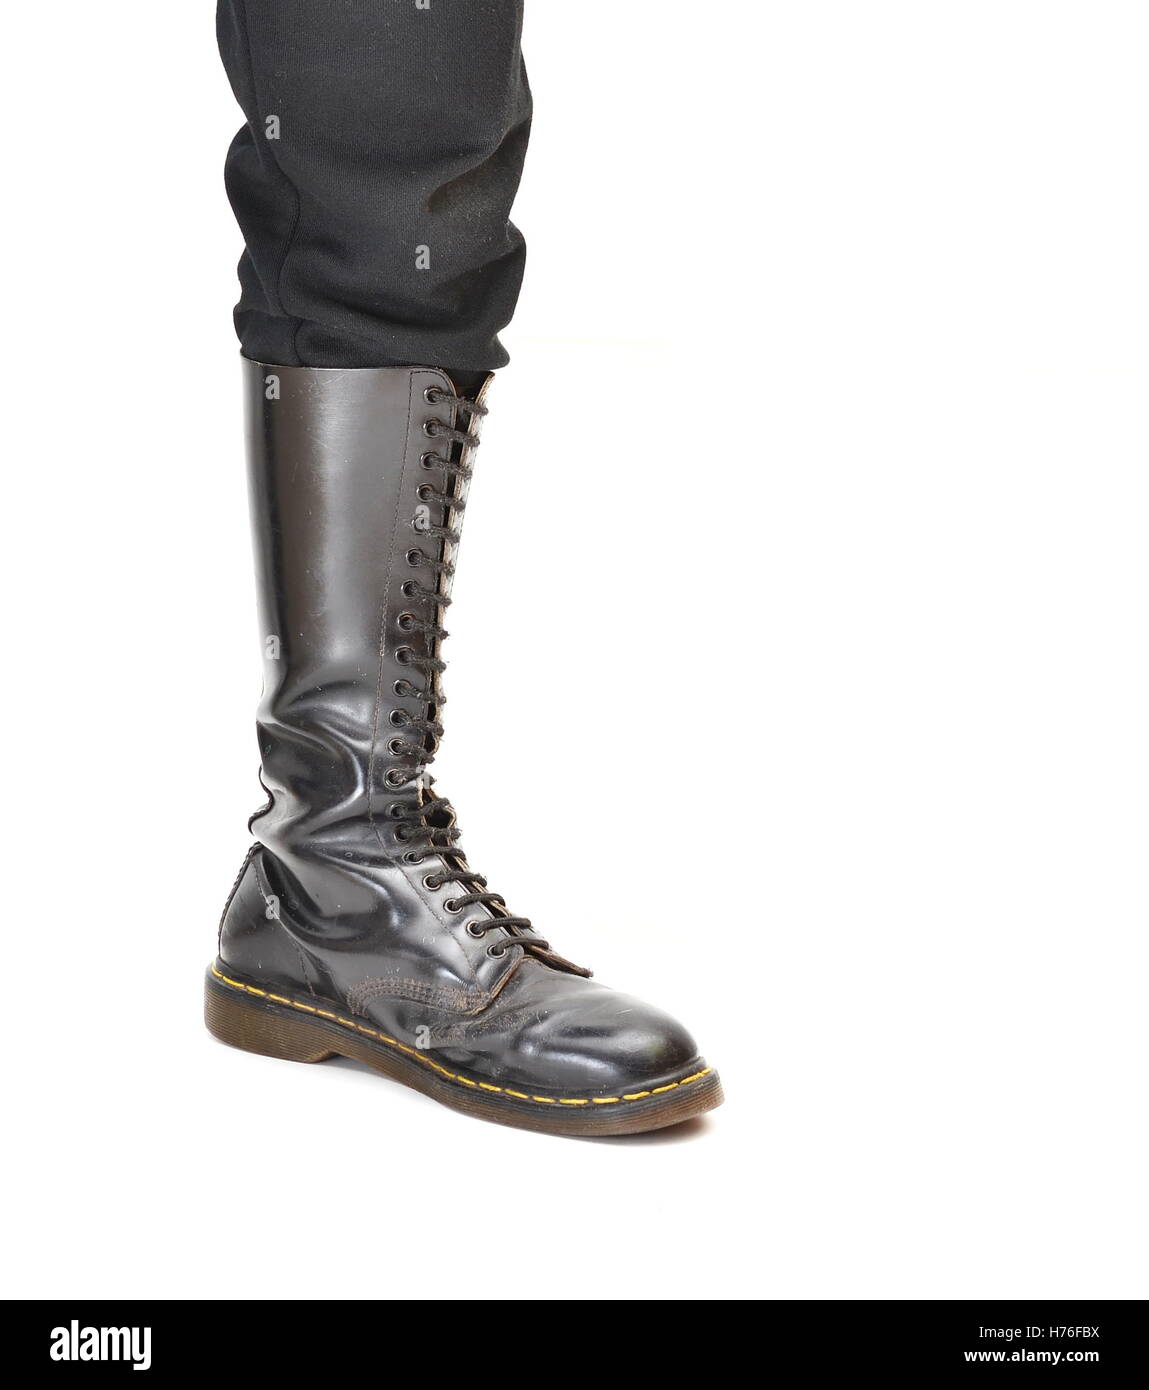 An old and rugged men's/unisex knee-high black 20-eyelet lace-up combat boot Stock Photo